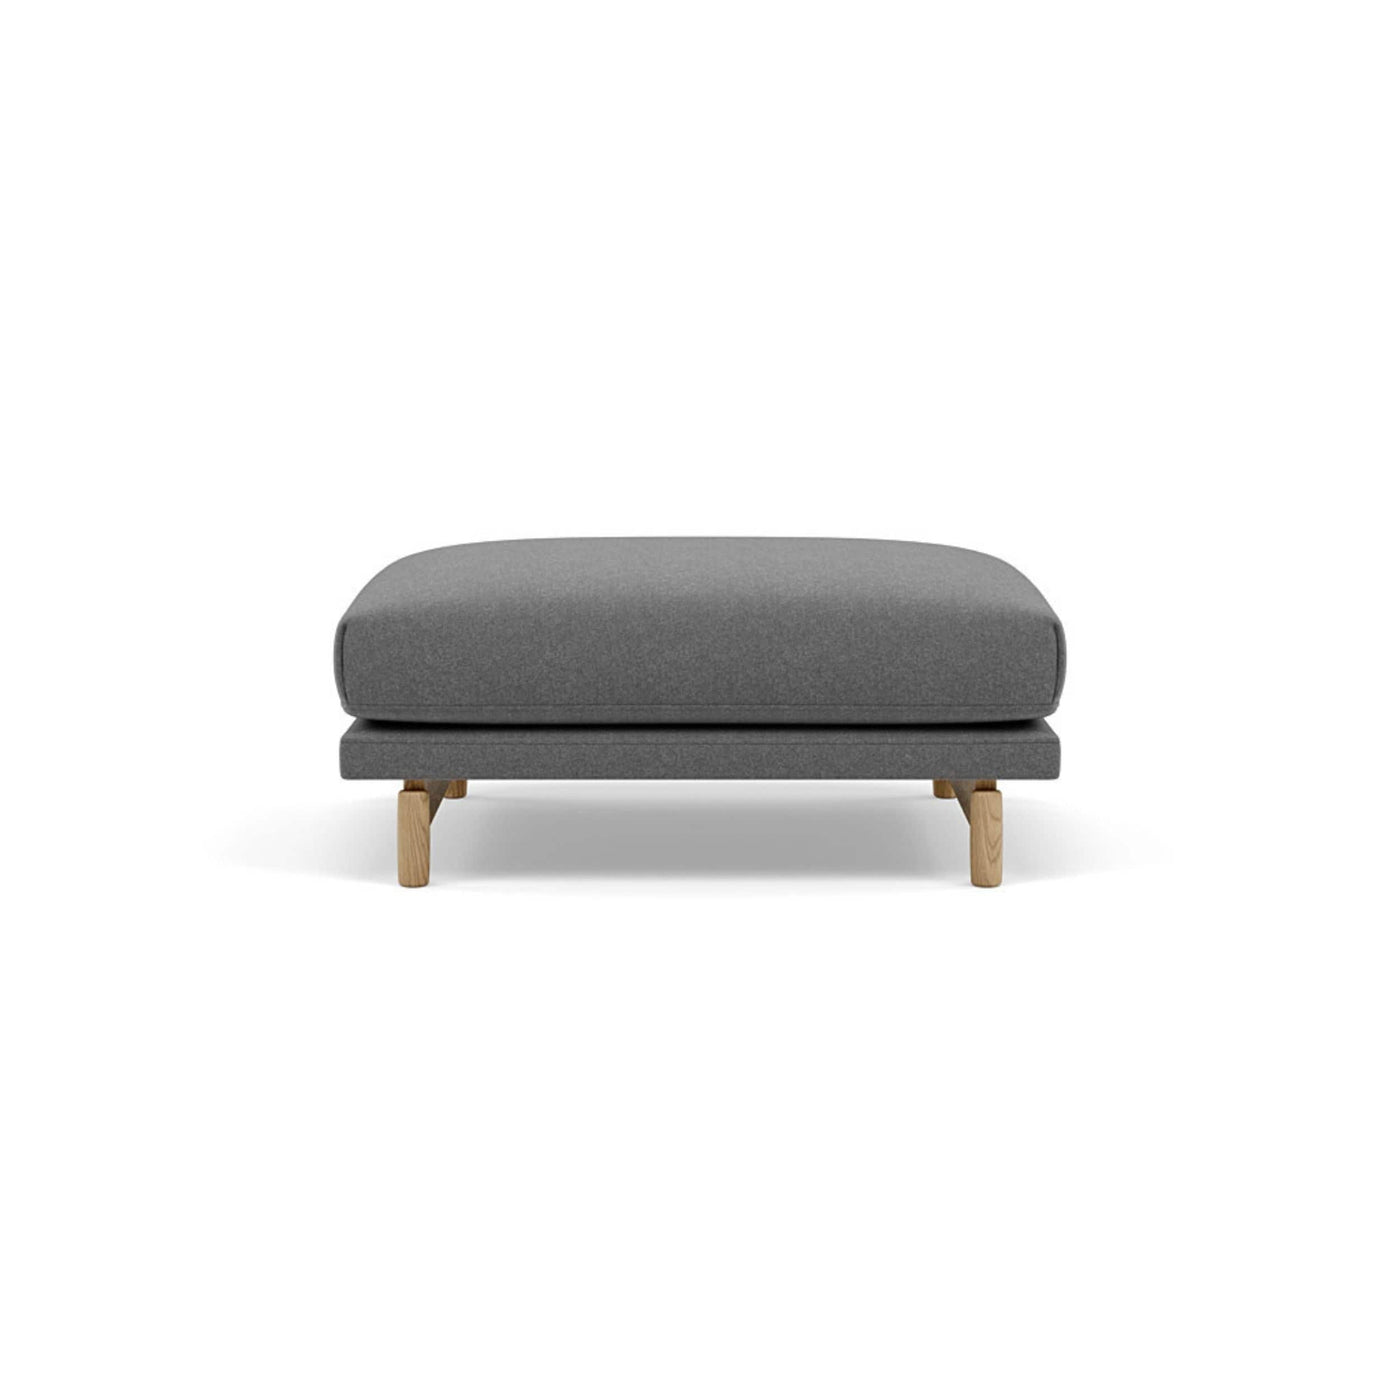 Muuto rest Pouf in wooly 1042 grey fabric. Made to order from someday designs. #colour_wooly-1042-grey